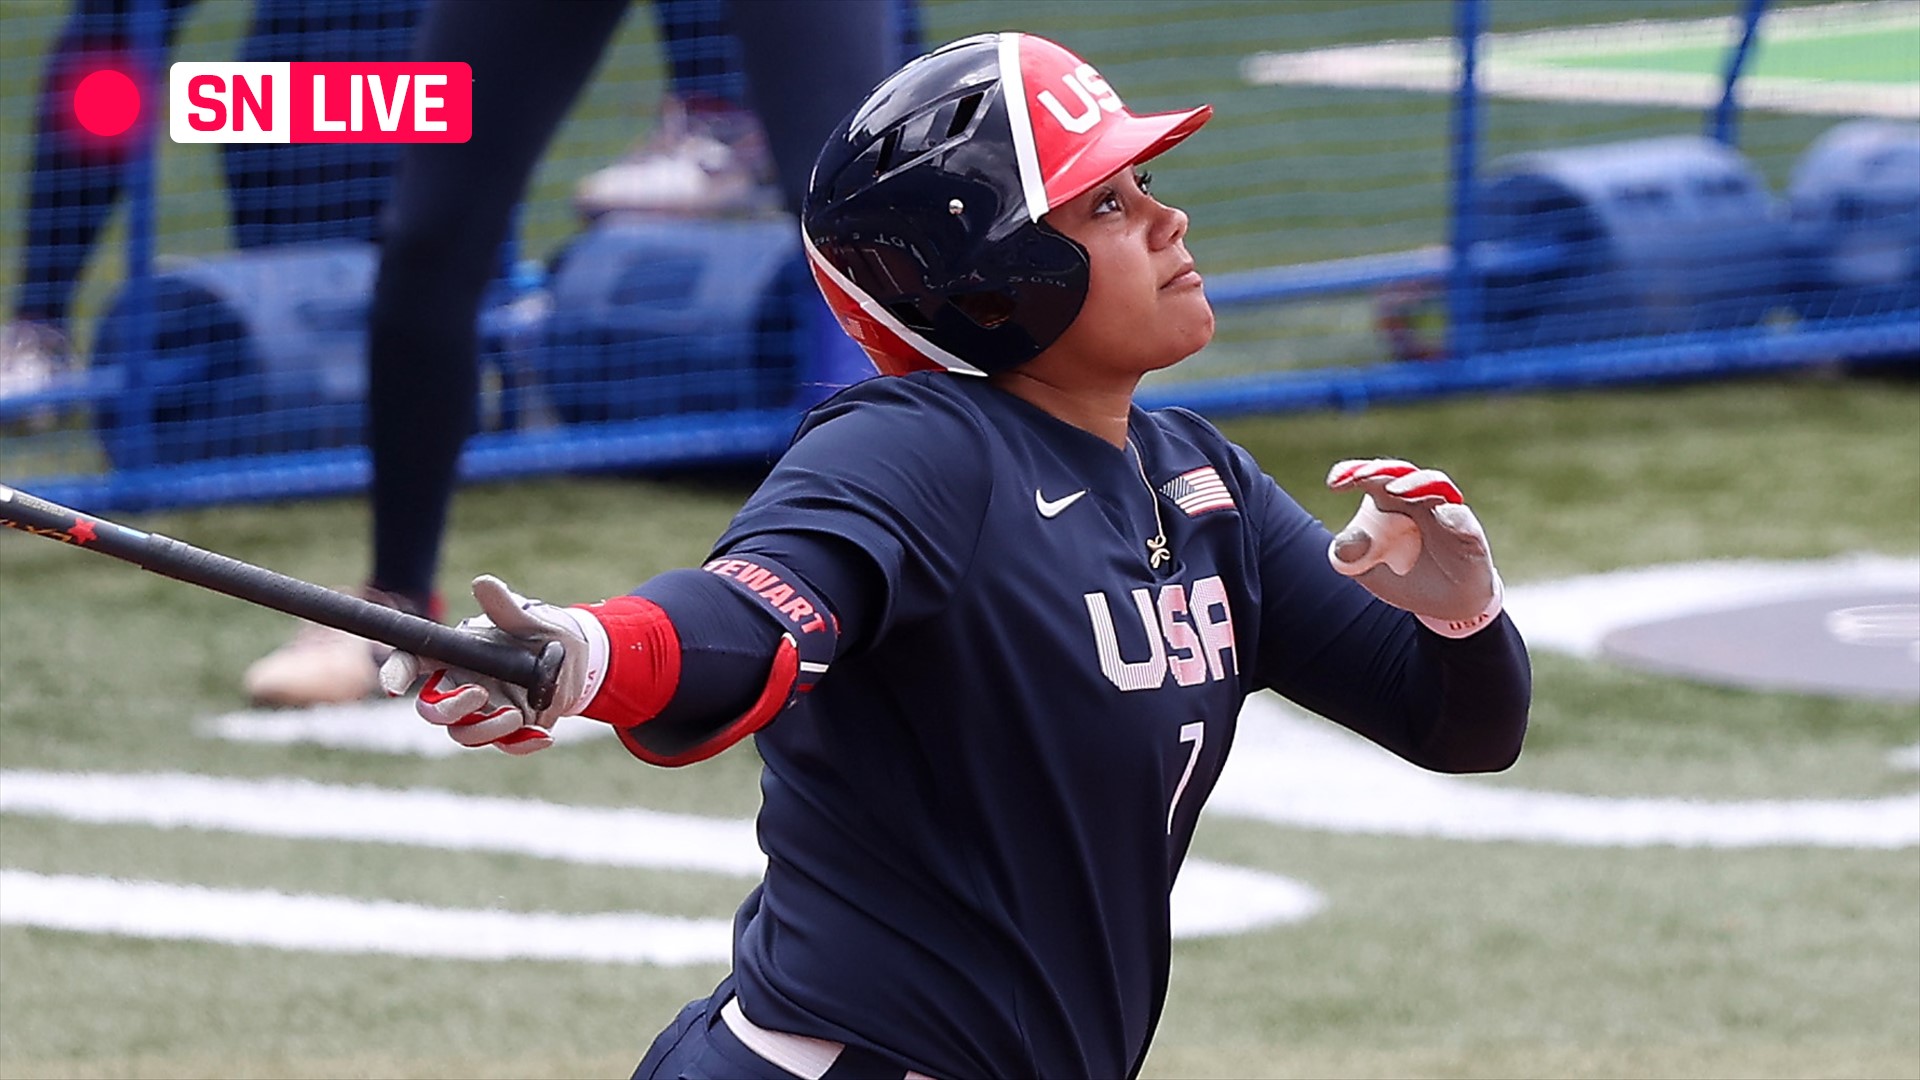 Usa Vs Japan Softball Live Score Updates Highlights From 21 Olympic Gold Medal Game Country Highlights